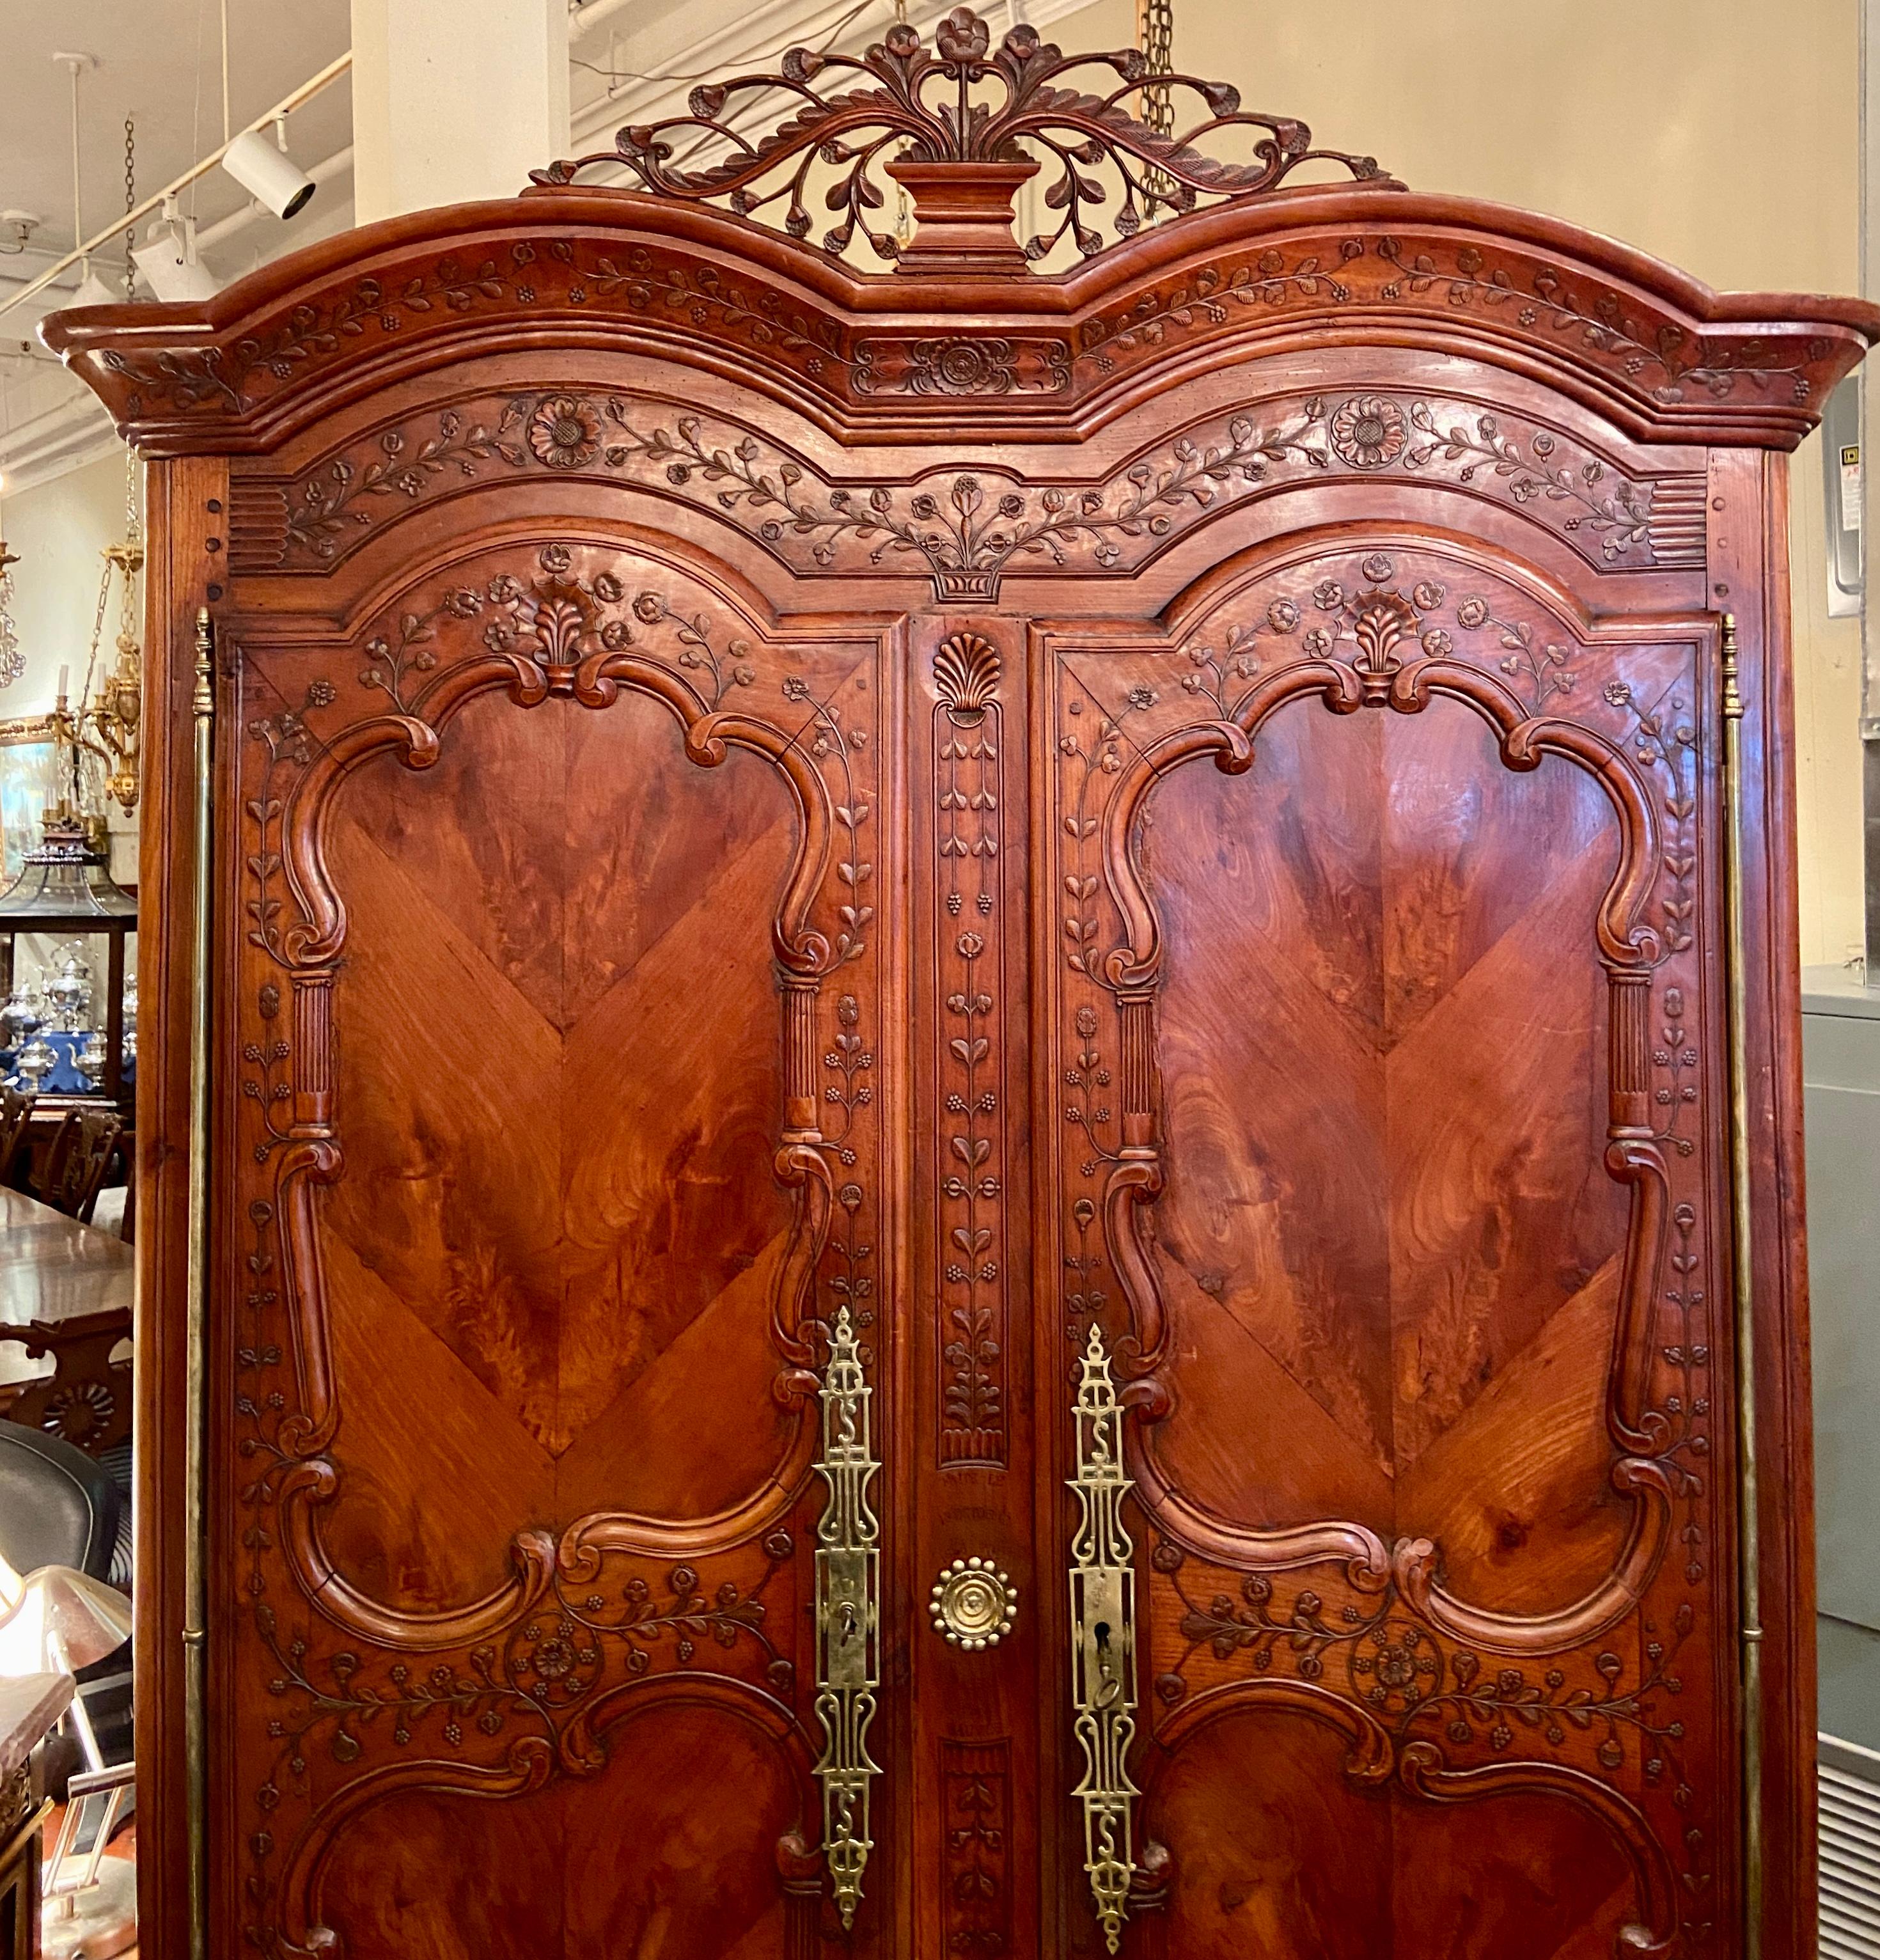 Antique French carved Cherry wood Armoire de Breton, from Rennes in the Brittany Region of France, Dated October 13th, 1846. Intricate carving and beautiful old hardware.